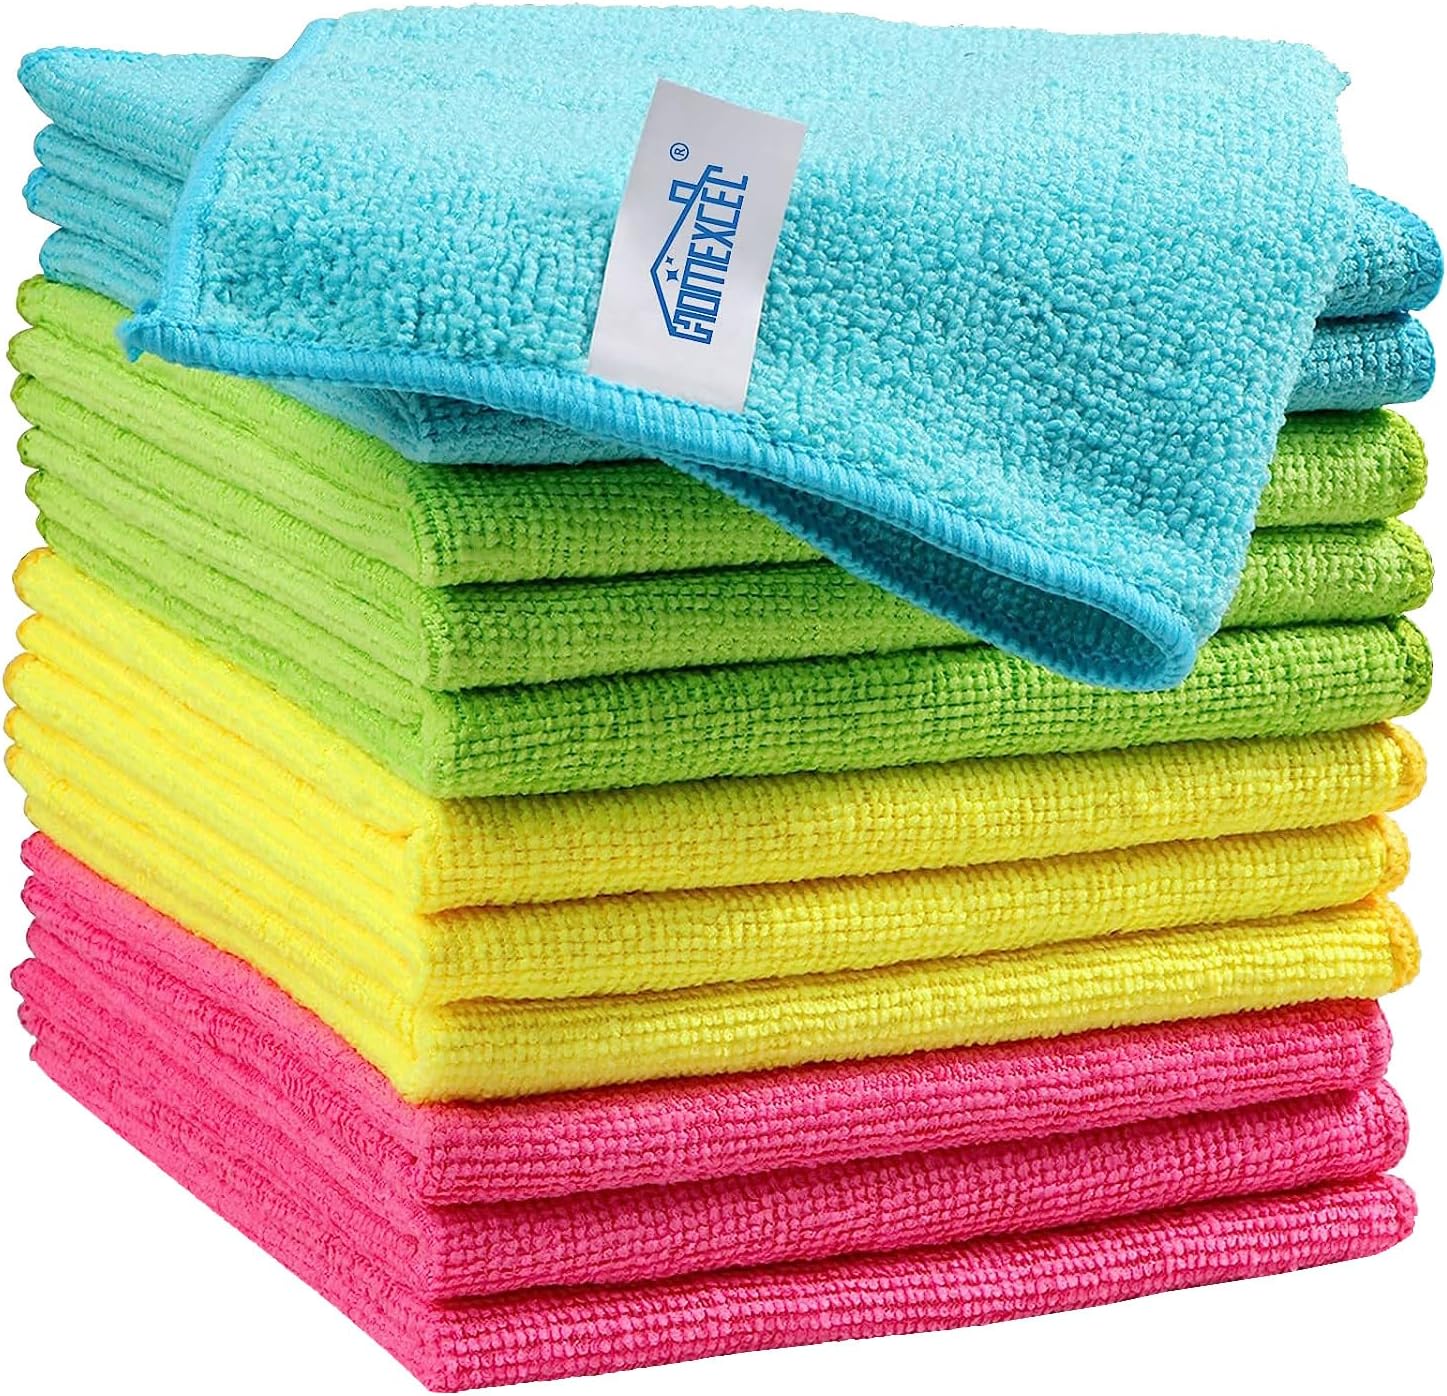 how to, amazon, 5 common microfiber cloth mistakes you're probably making - and how to avoid them